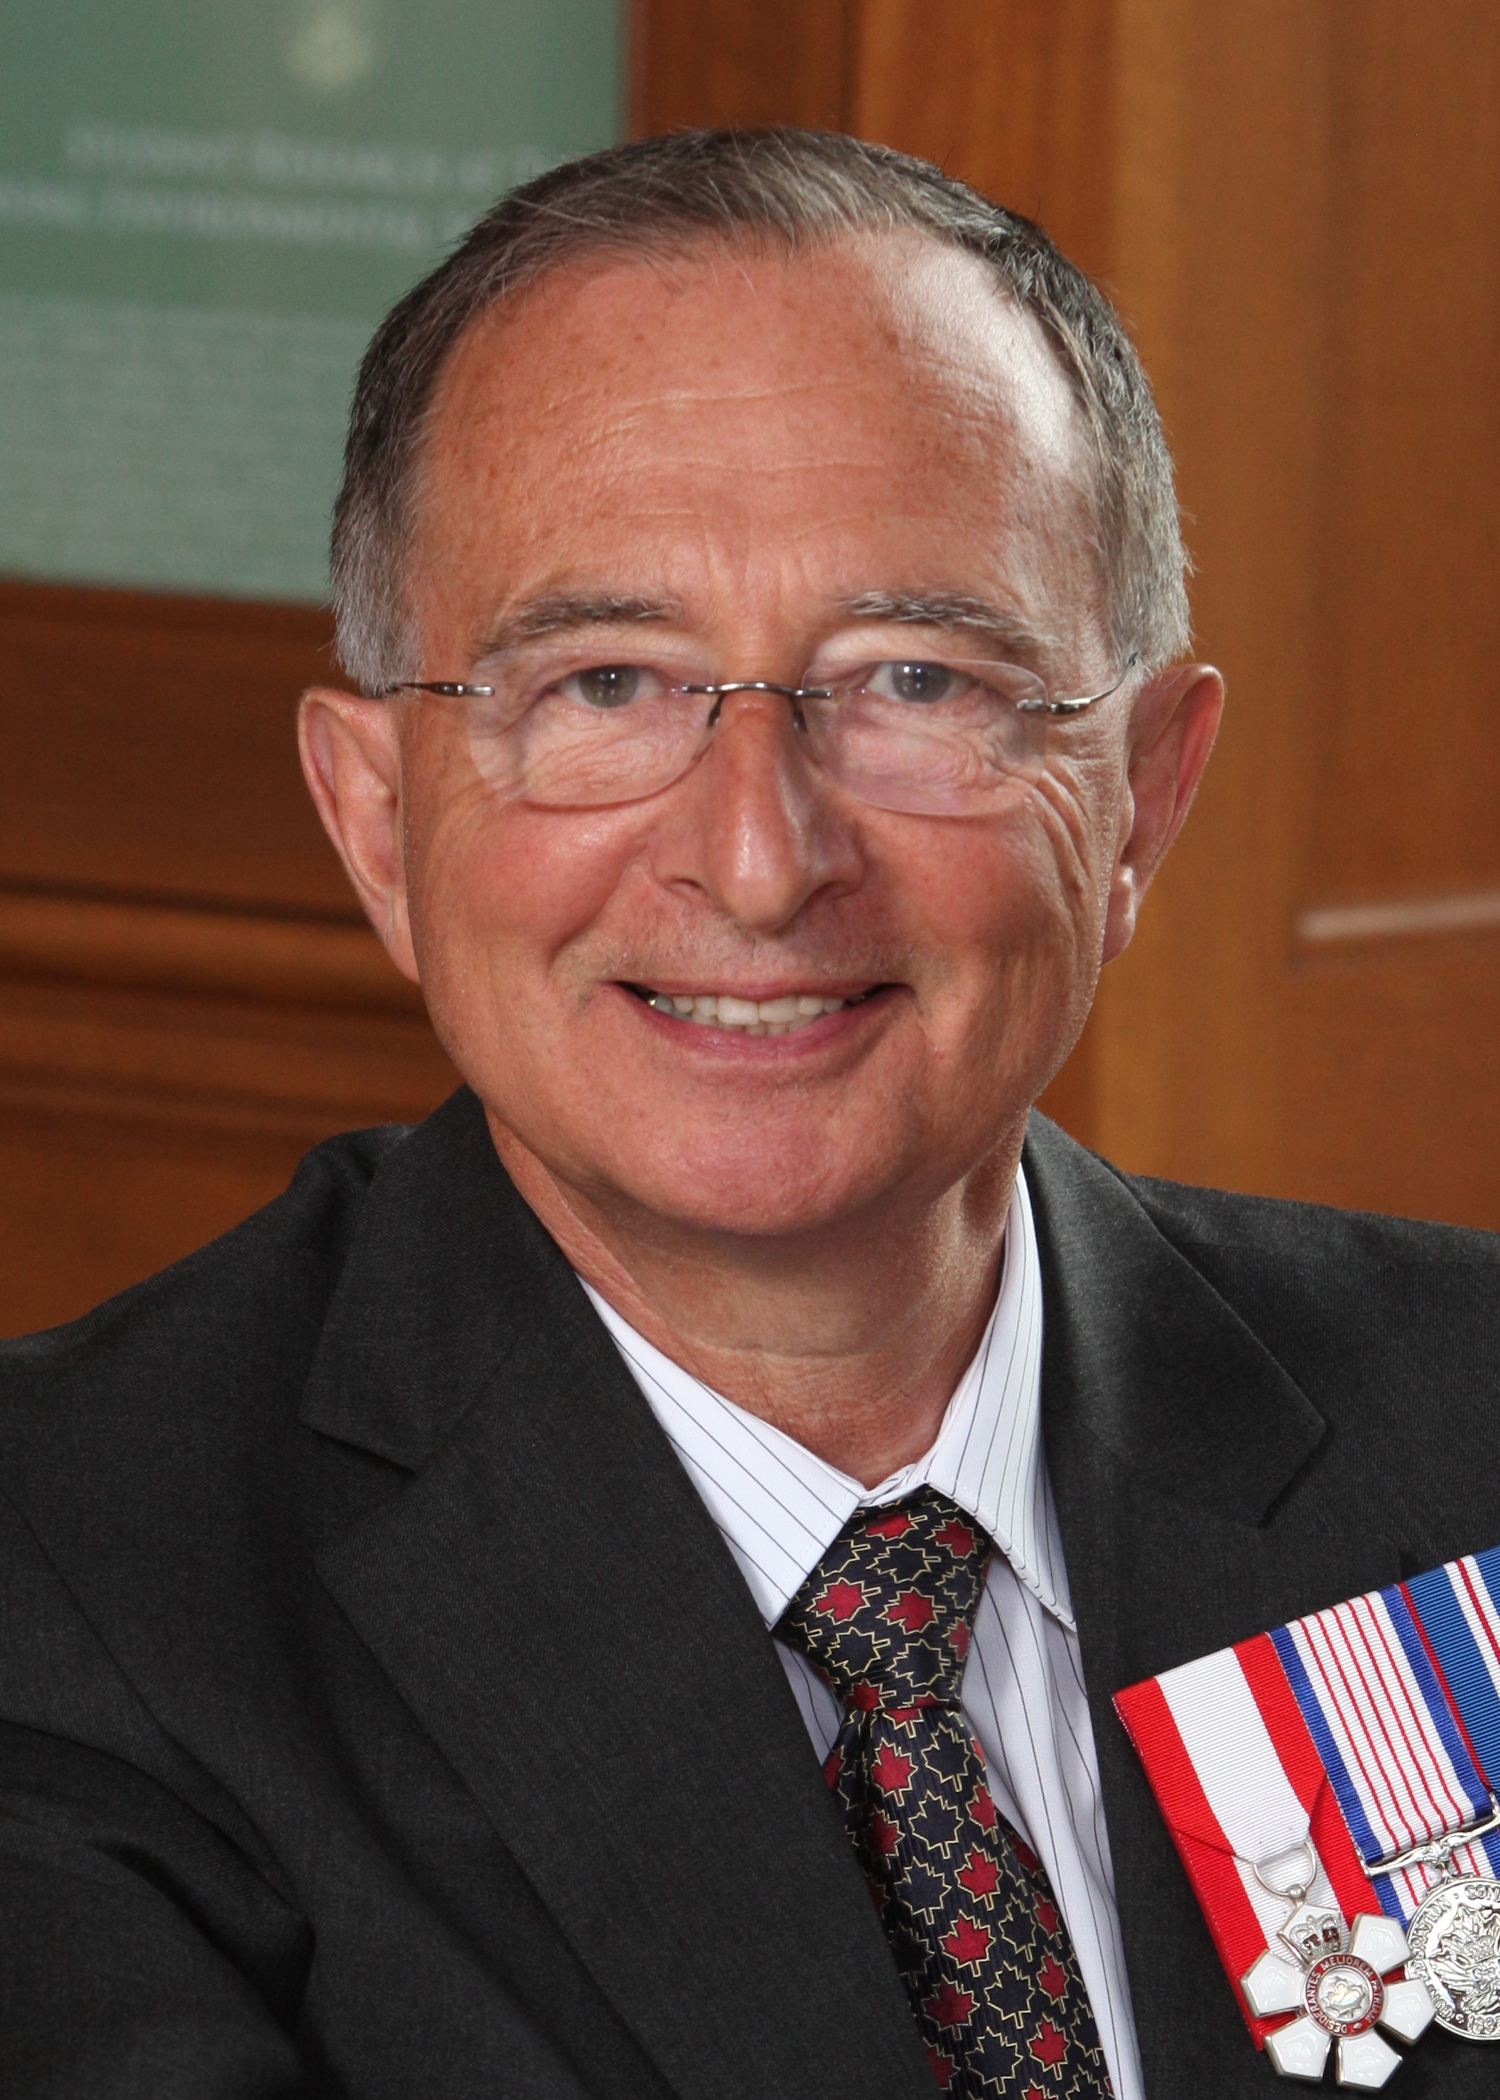 the older man has two medals on his lapel